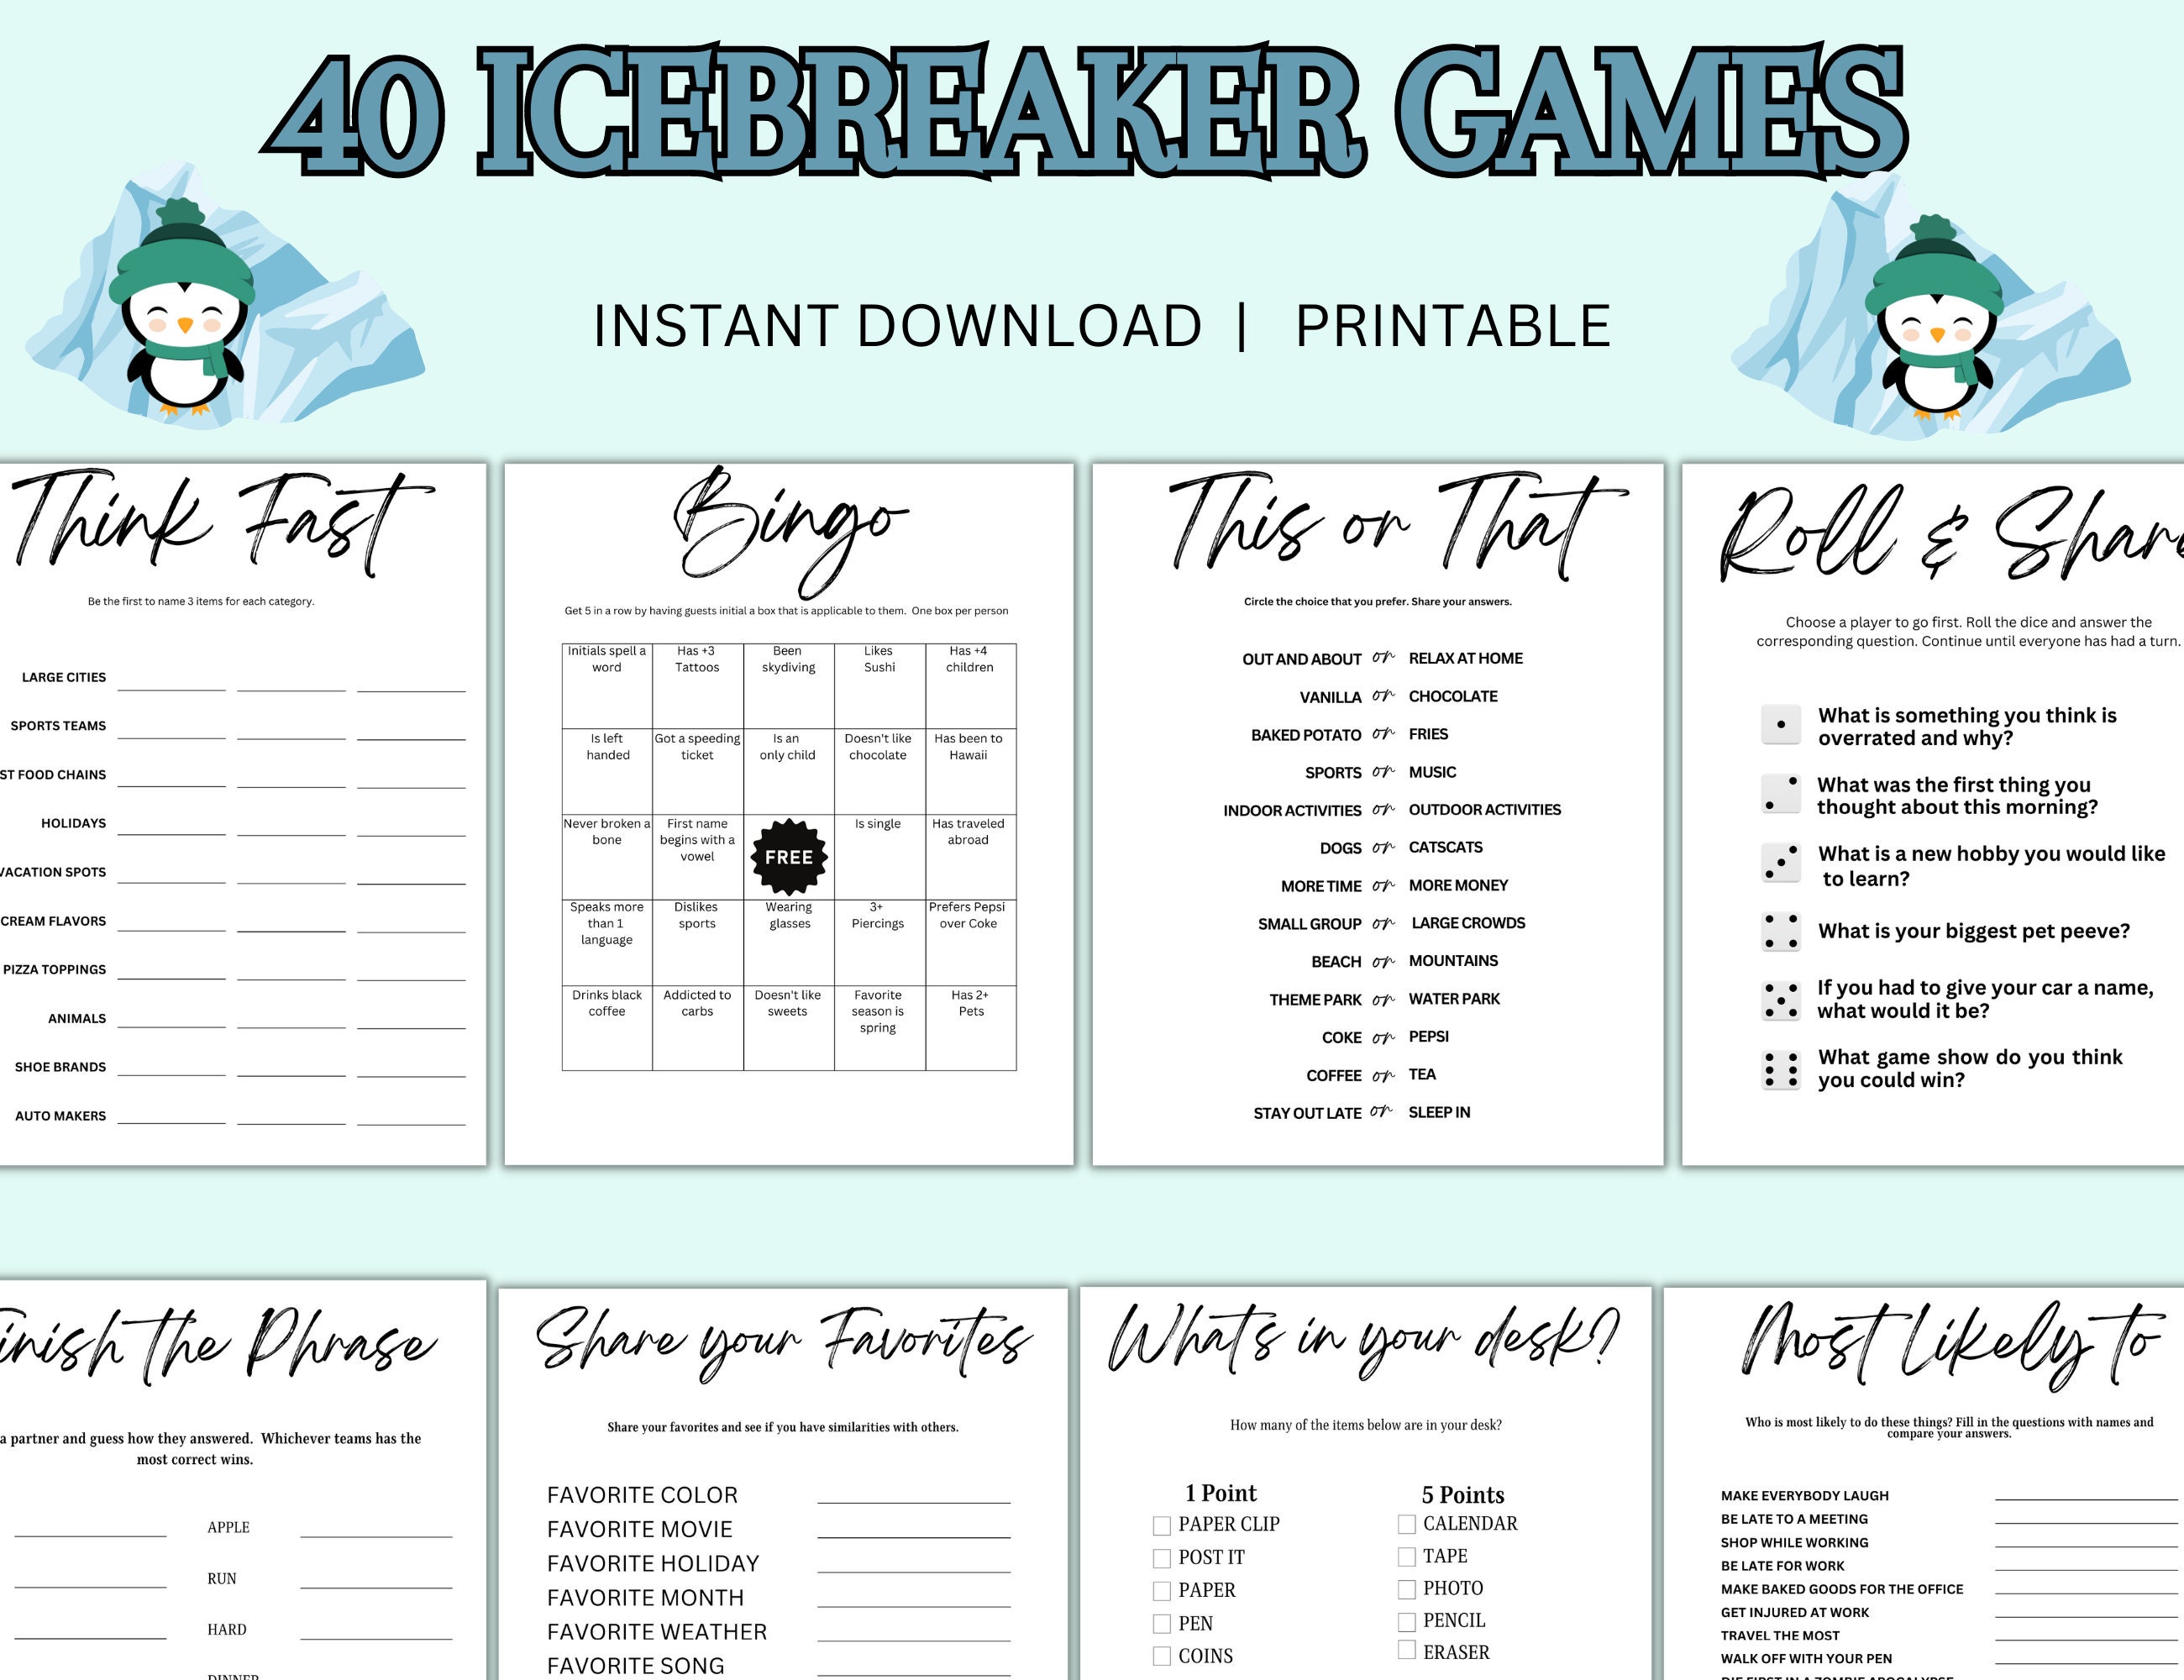 246 Cool Things to Collect (Collection Ideas) - IcebreakerIdeas